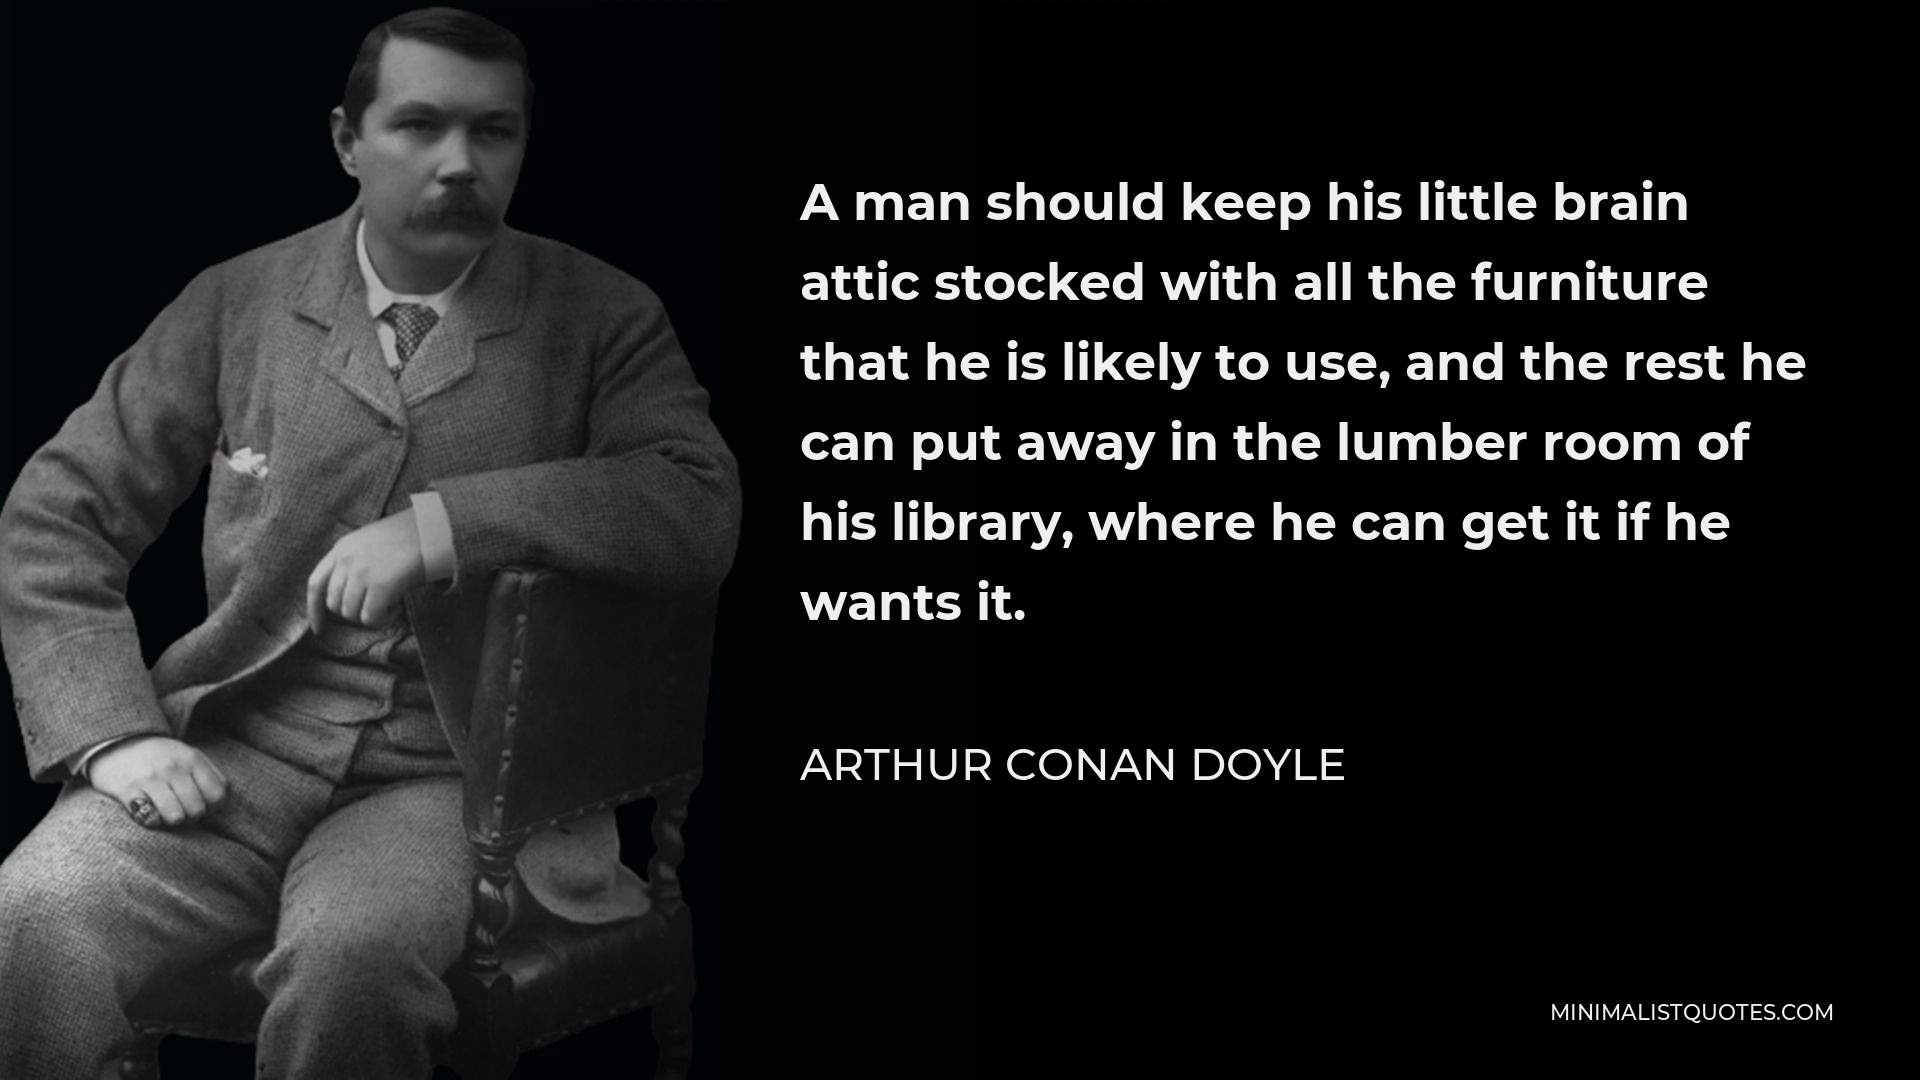 Arthur Conan Doyle Quote - A man should keep his little brain attic stocked with all the furniture that he is likely to use, and the rest he can put away in the lumber room of his library, where he can get it if he wants it.